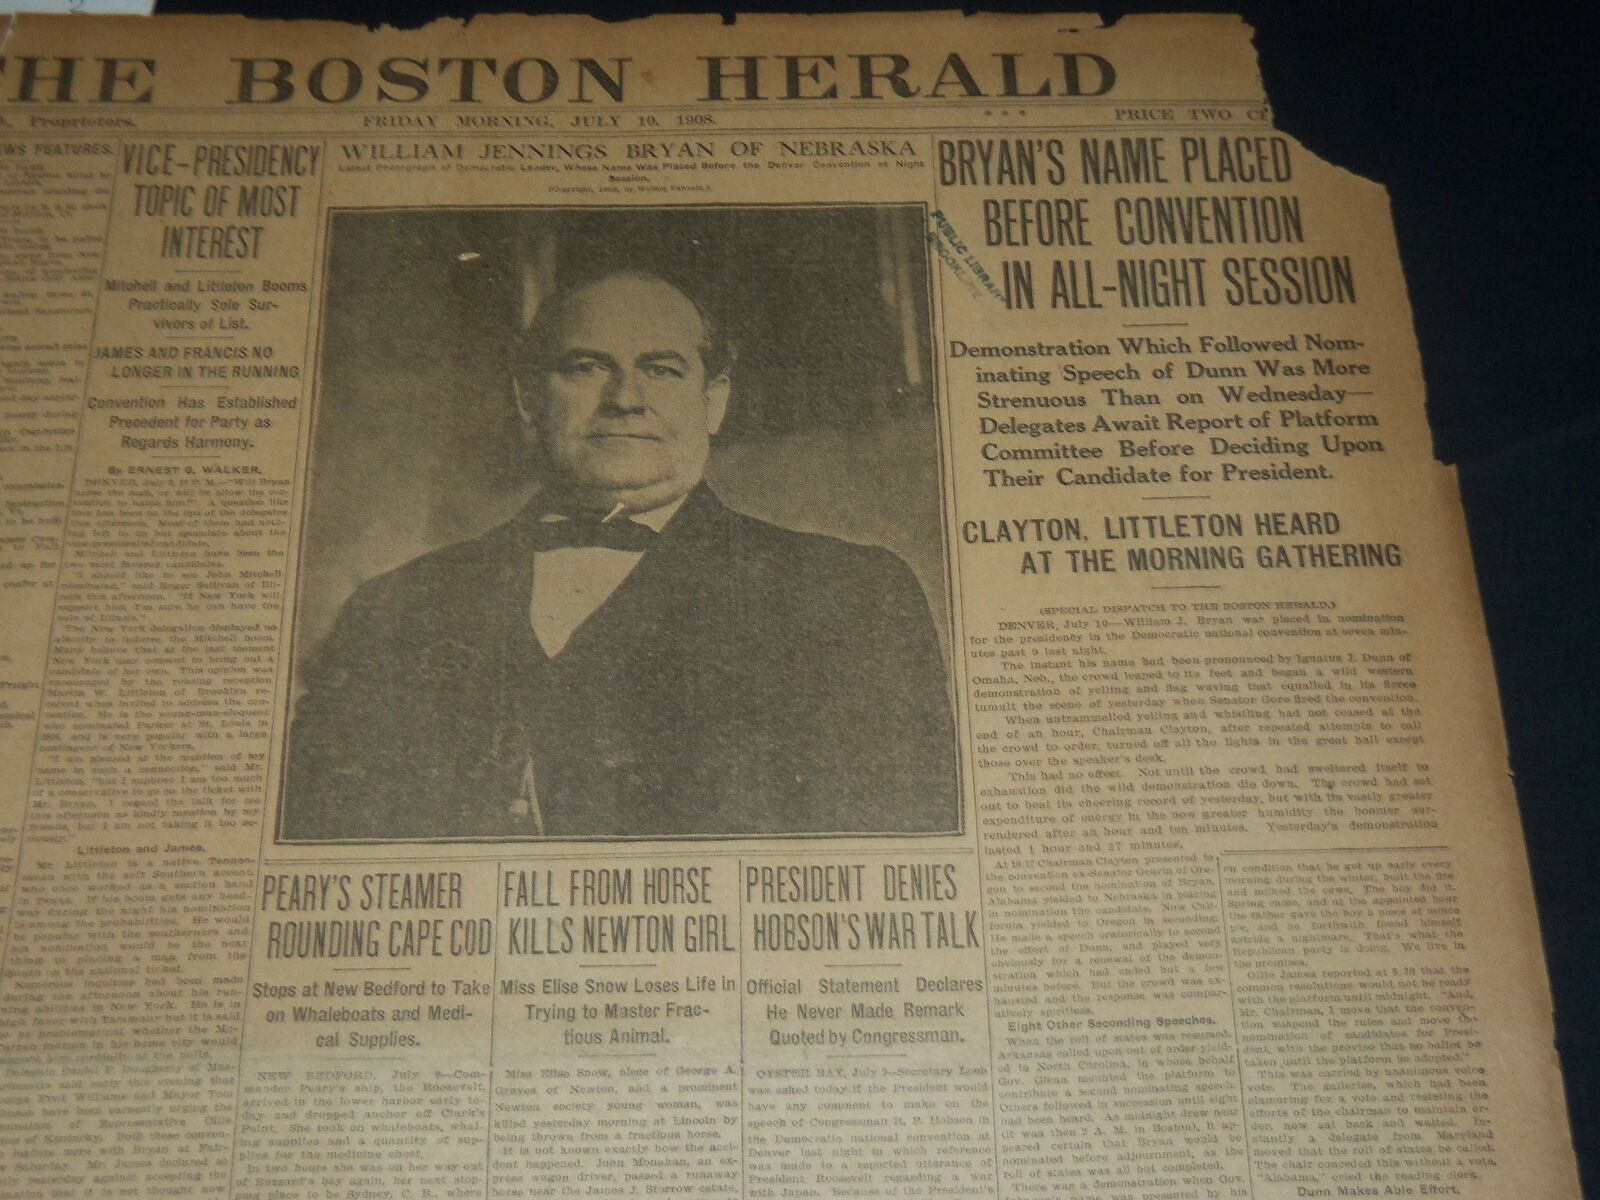 1908 JULY 10 THE BOSTON HERALD - BRYAN'S NAME PLACED BEFORE CONVENTION - BH 320